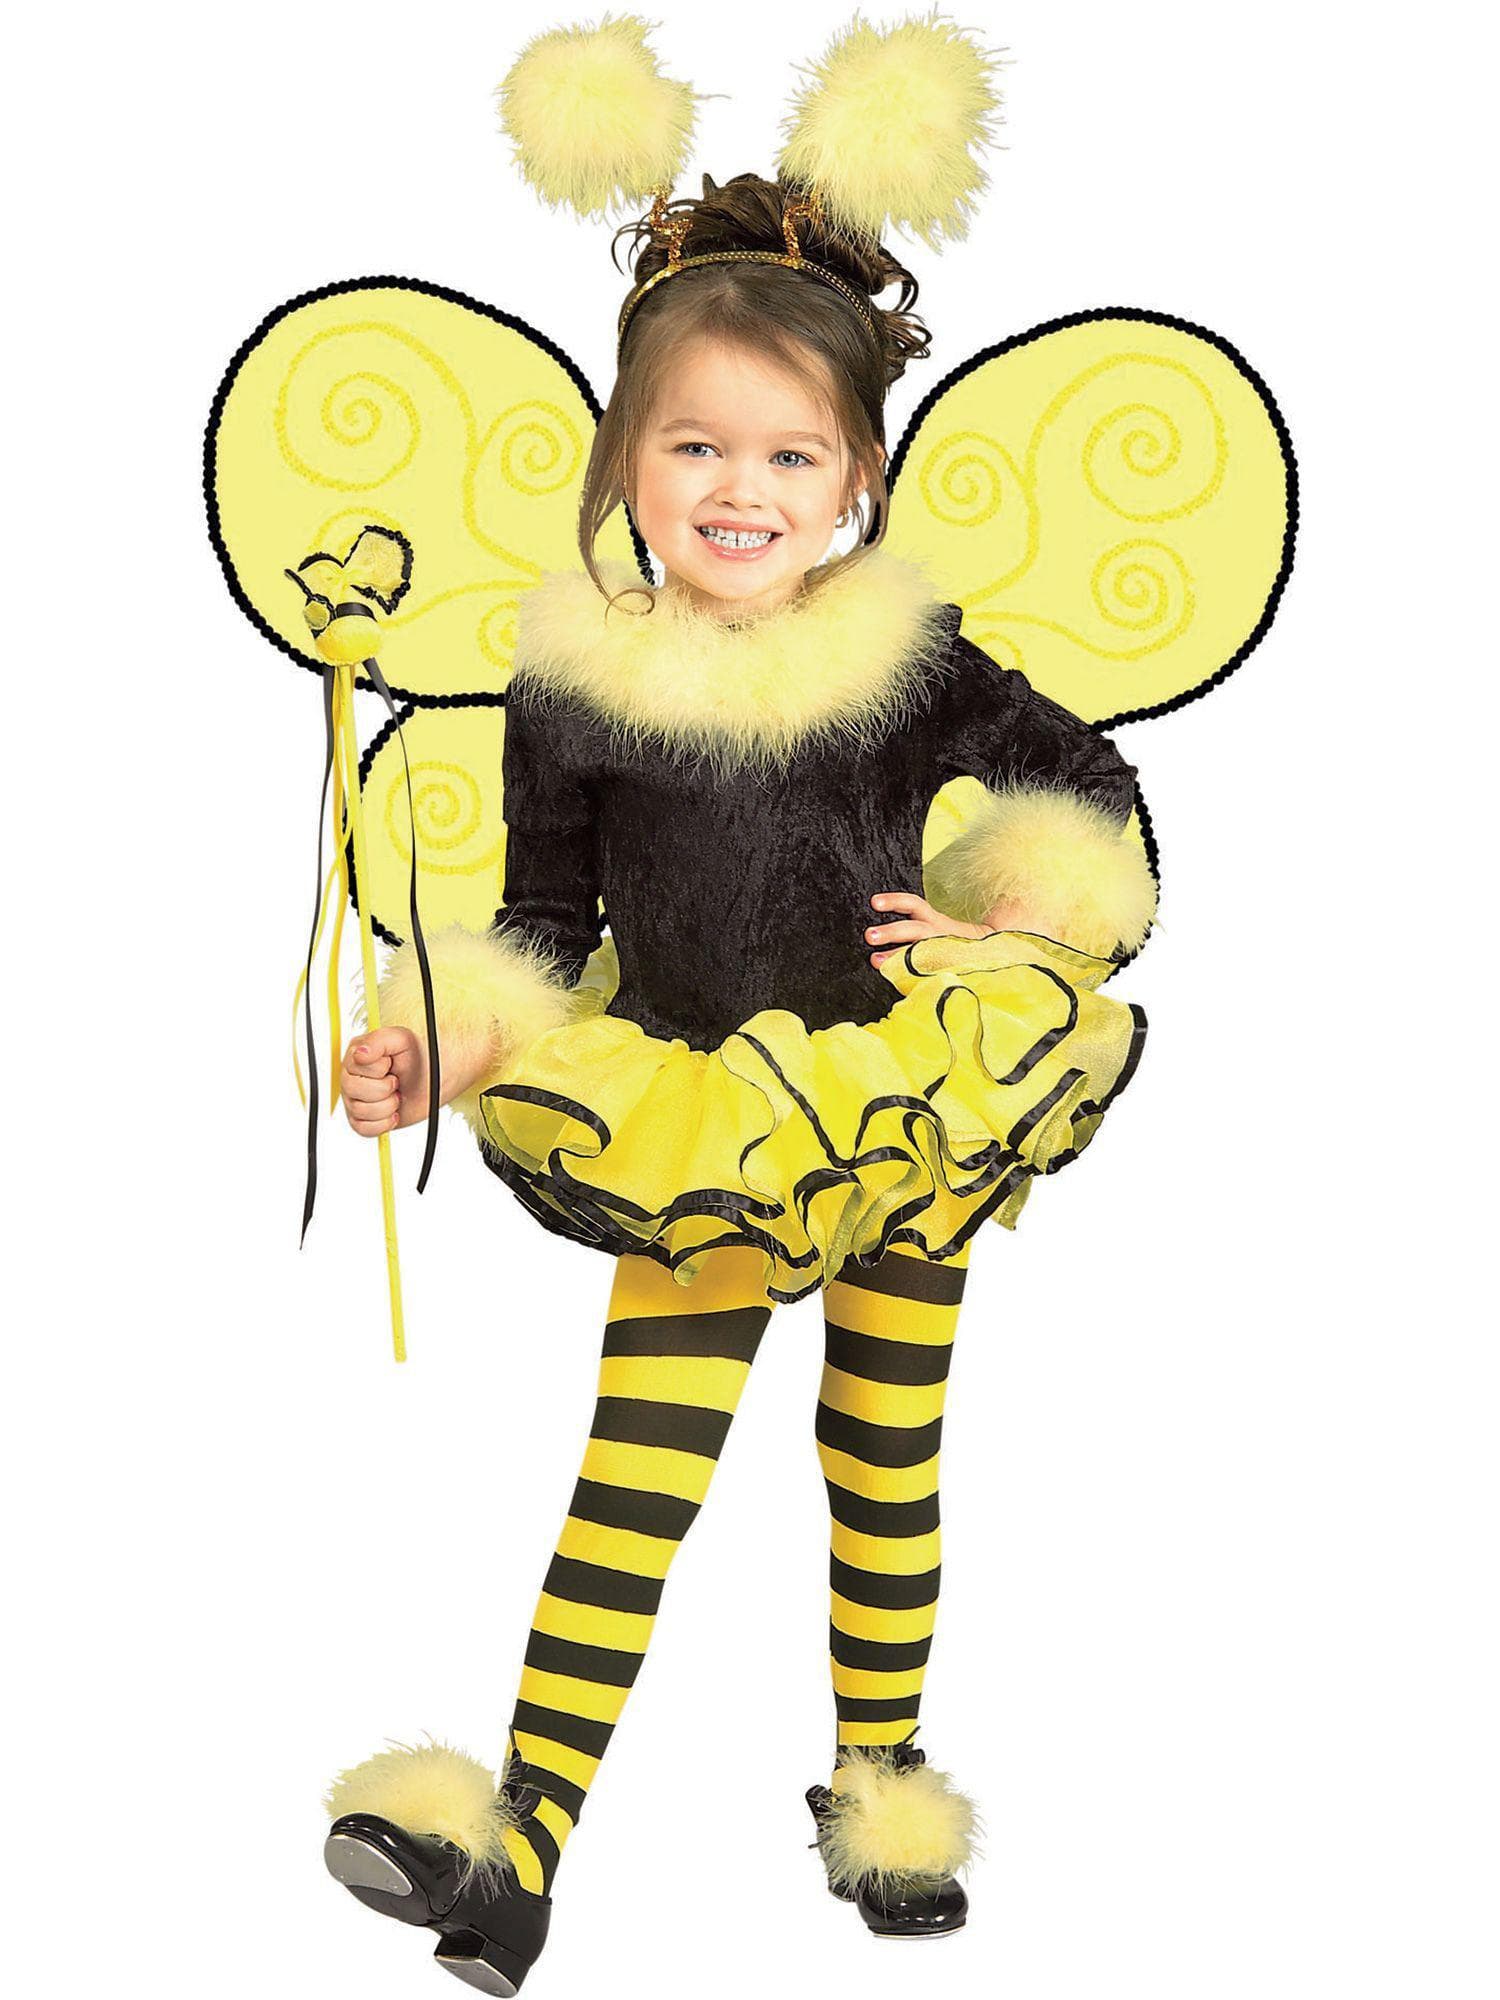 Bumble Bee Beauty Costume for Toddlers - costumes.com